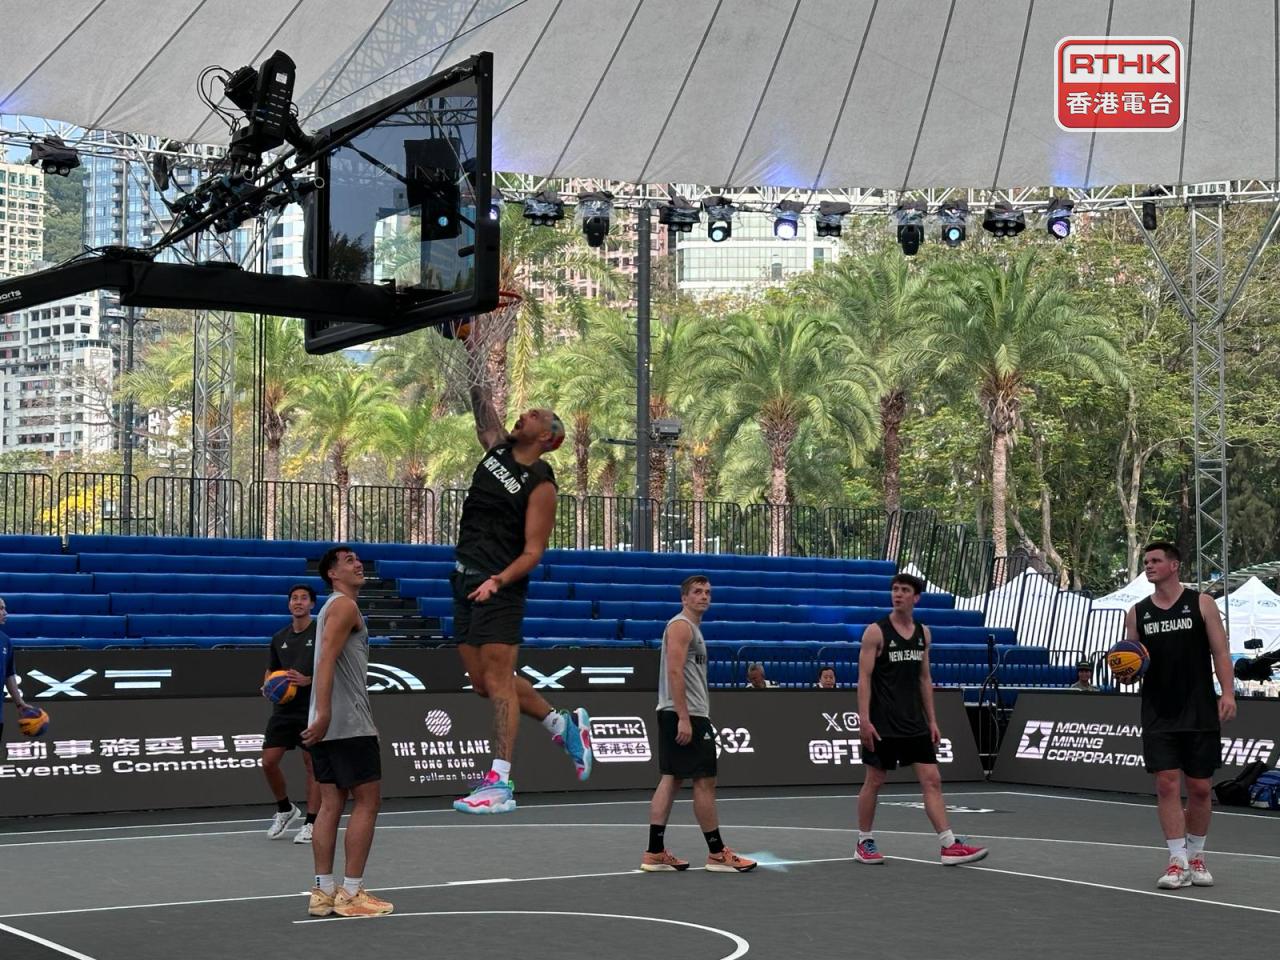 First 3x3 basketball Olympic qualifiers in HK